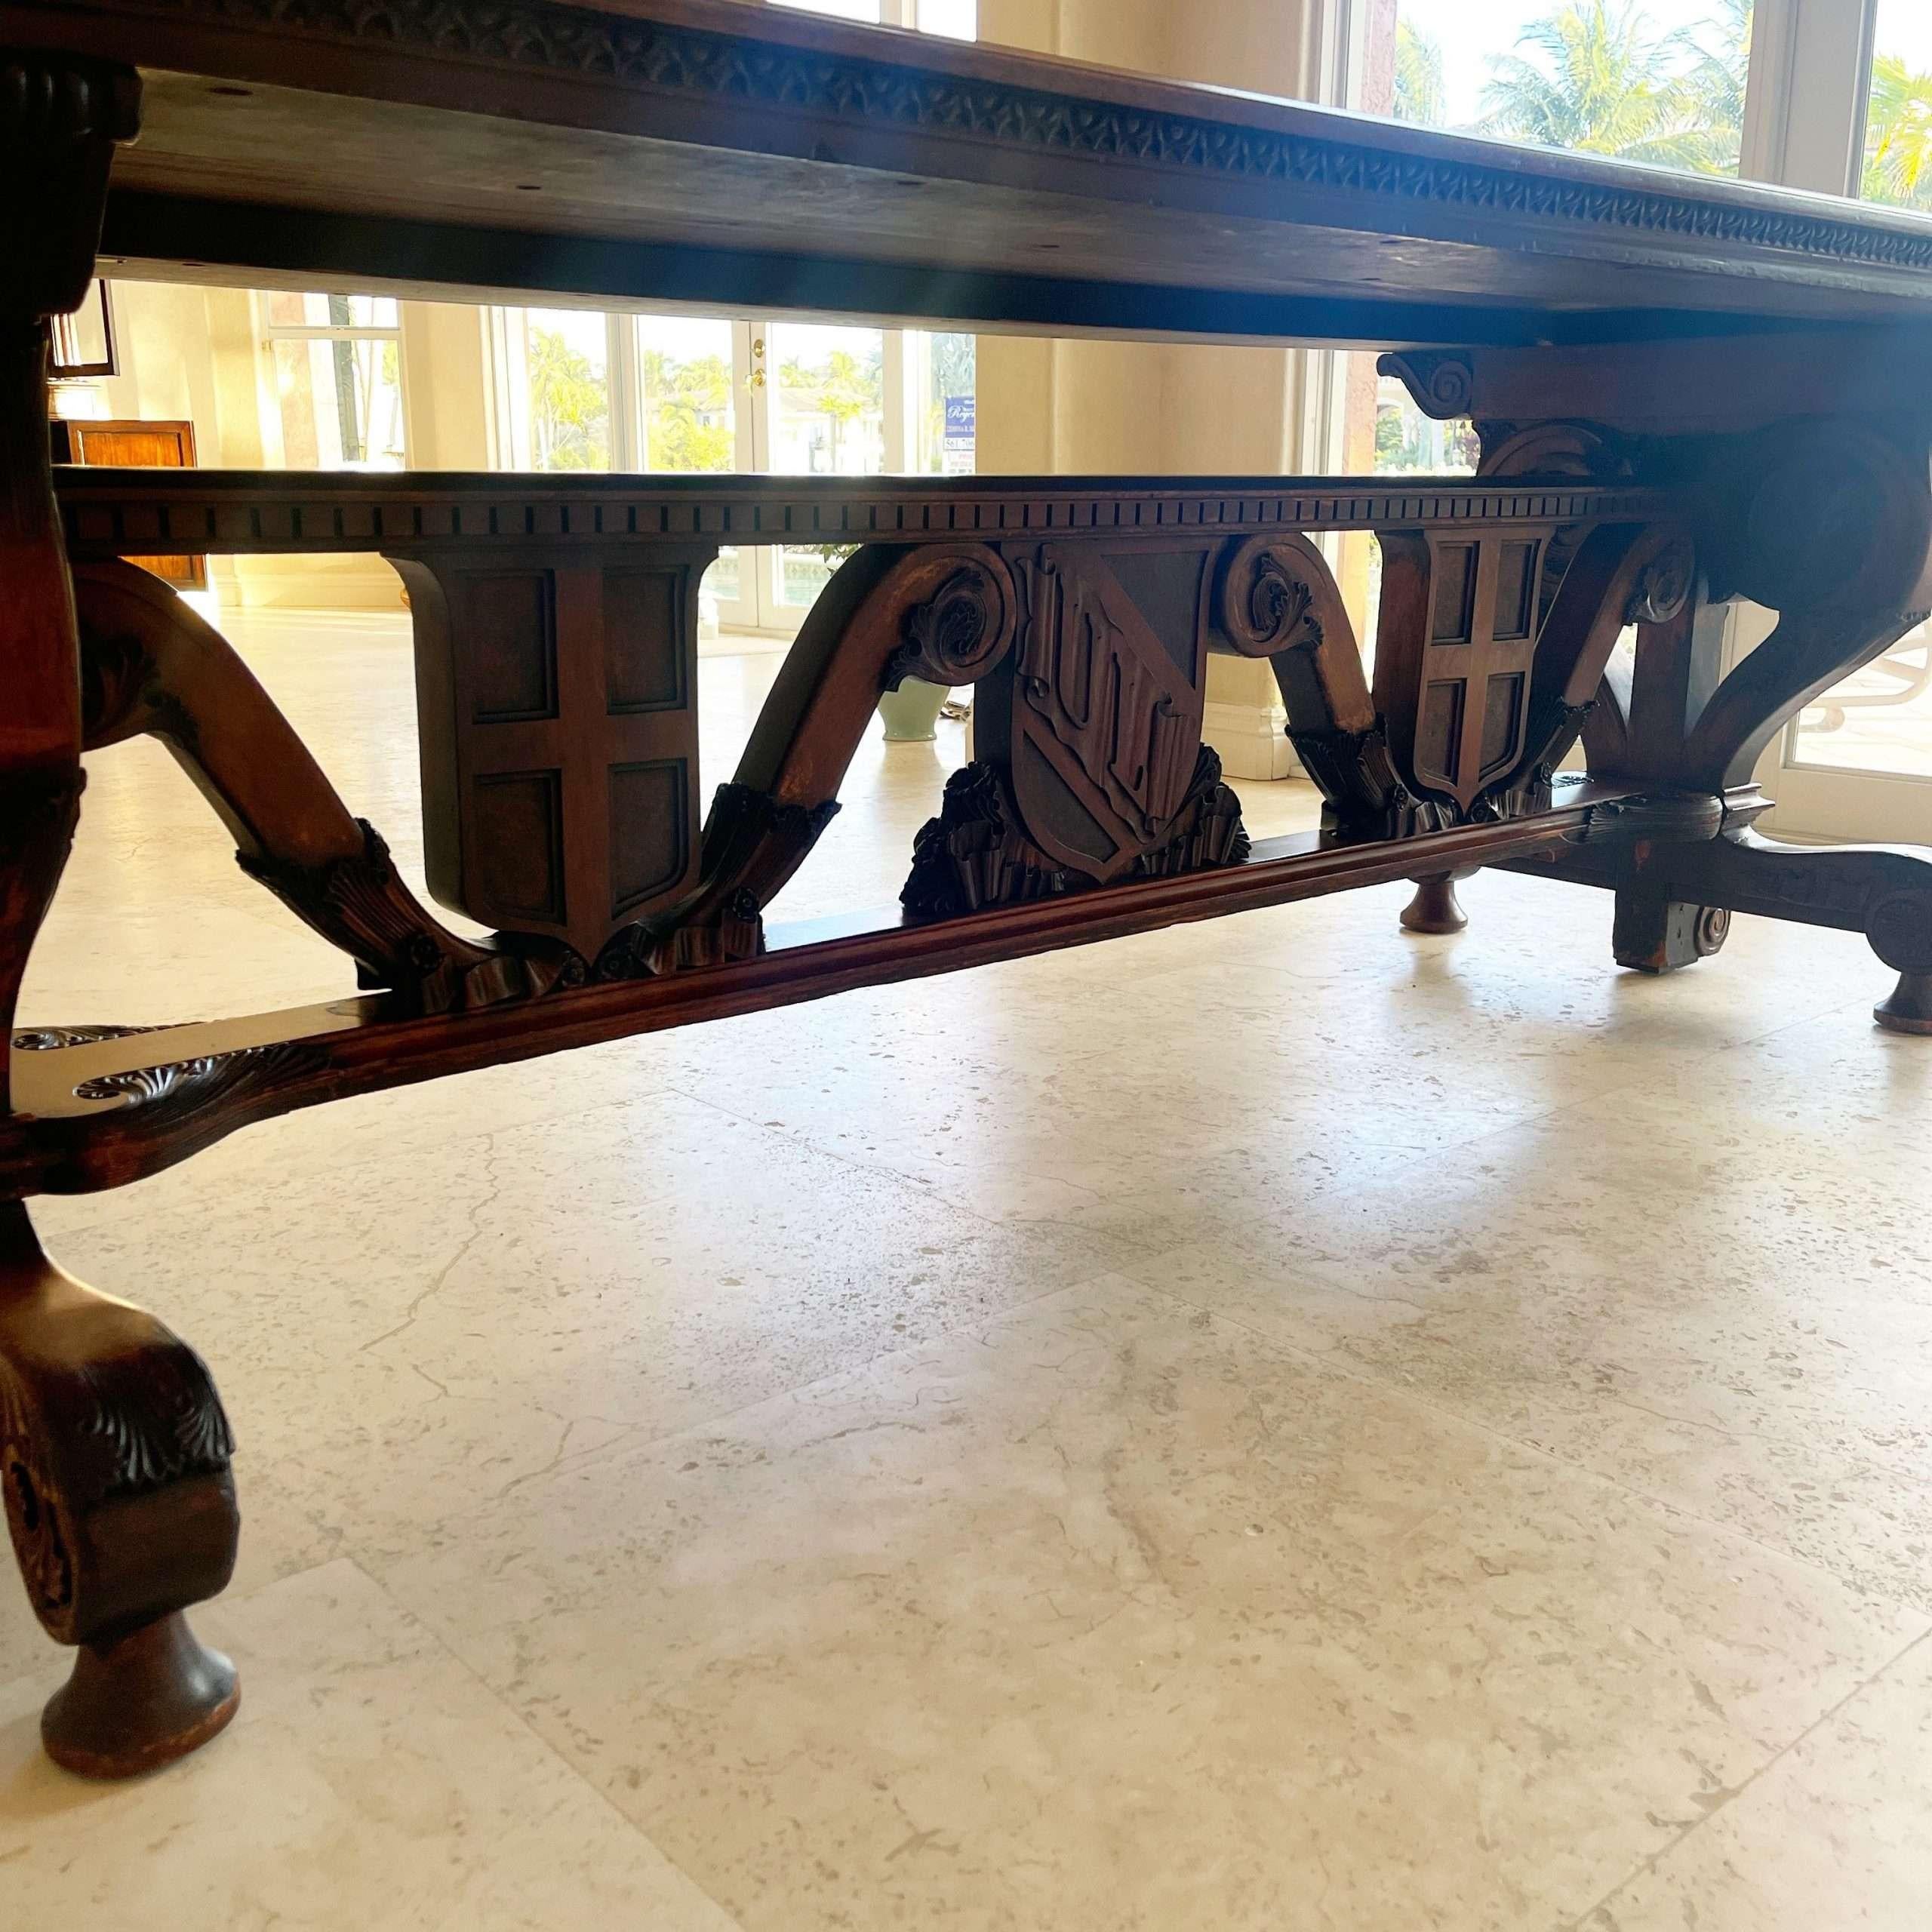 Intriguing hand carved renaissance revival wooden dining/conference table owned the Philco Corp. The table was gifted to a significant employee of Ford Motors when he was tasked with a project at the Philco Corp headquarters. This table was being